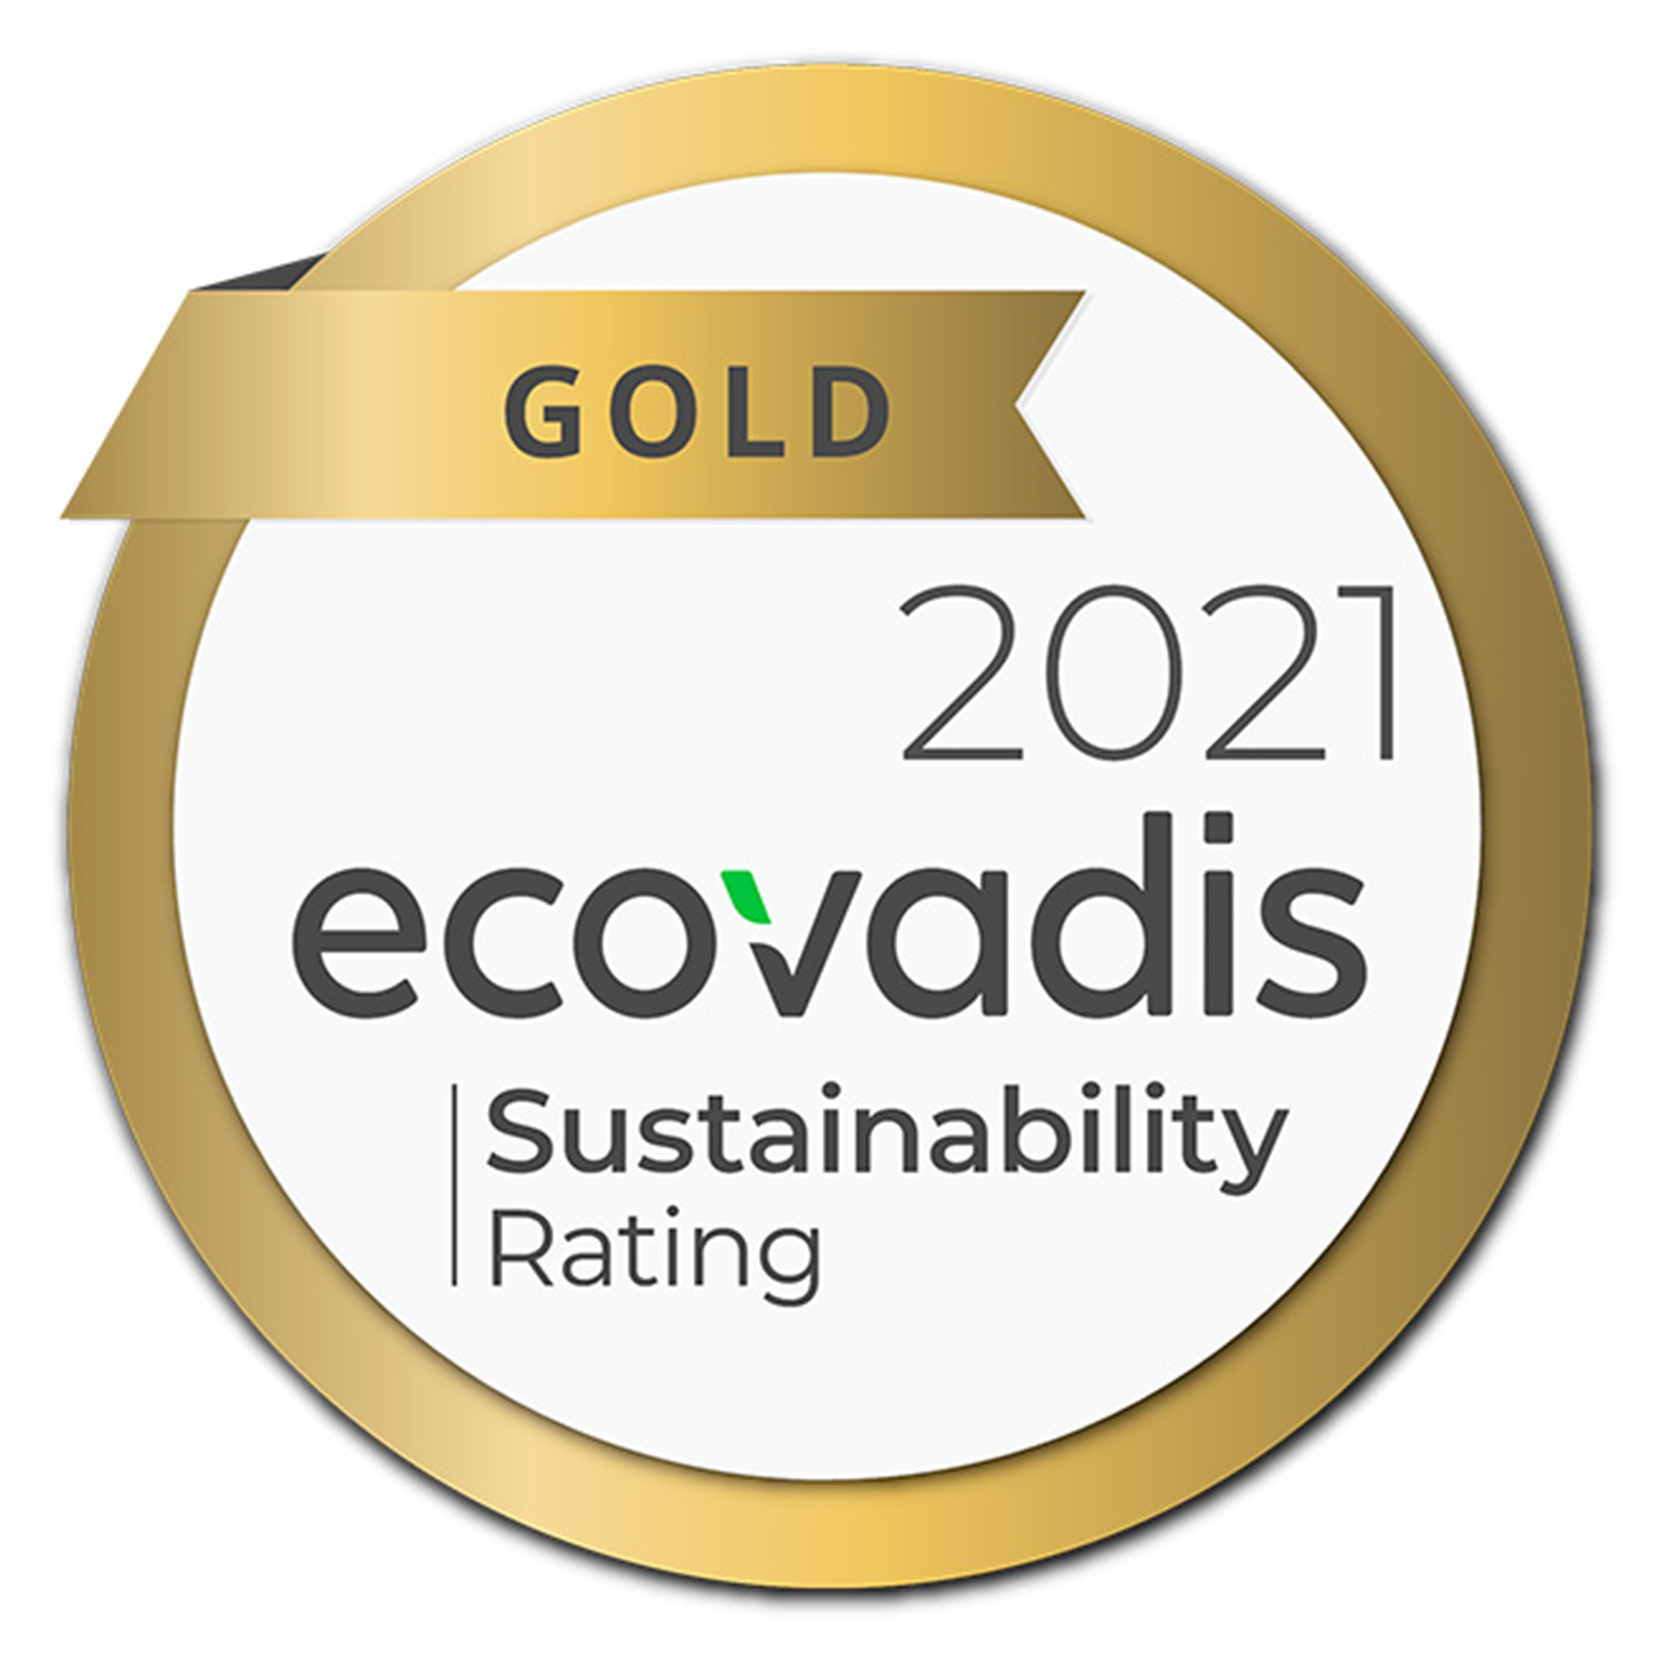 L&L Products has been awarded a GOLD medal by EcoVadis in 2021 in recognition of its ongoing commitment to sustainability. This puts L&L Products in the top 5% of the companies in its industry. Thanks to the commitment of our employees and management, we have increased our score in all the assessed categories: Environment, Human Rights & Labor, Ethics, and Sustainable Purchasing.